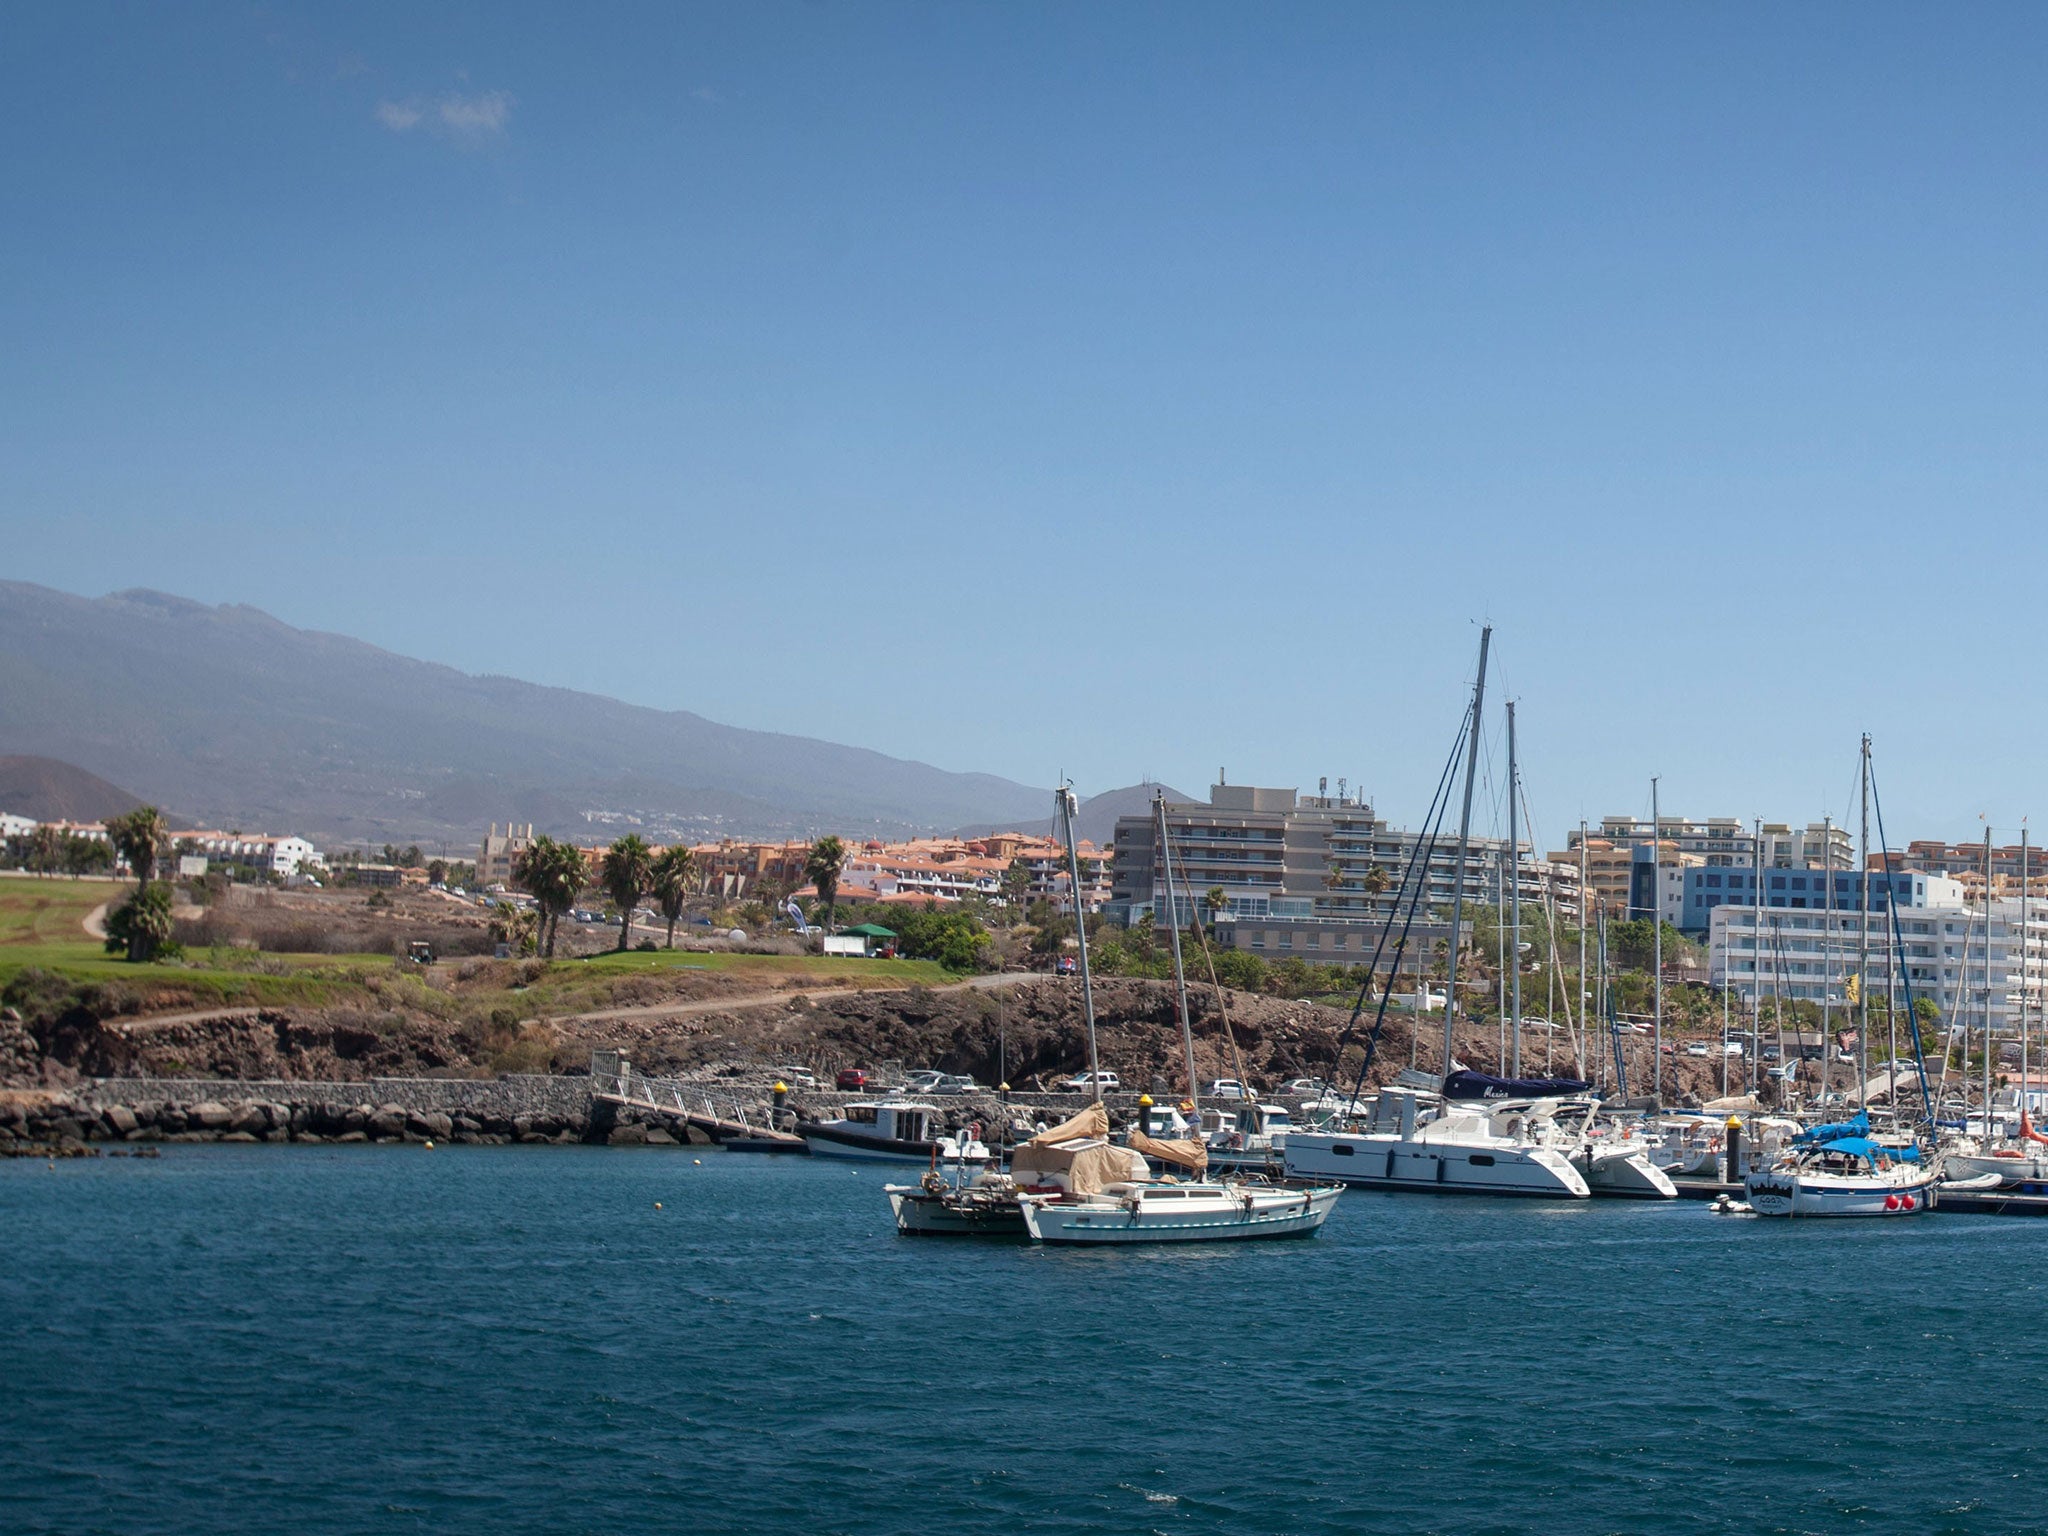 Tenerife is as much a part of the EU as Tyneside